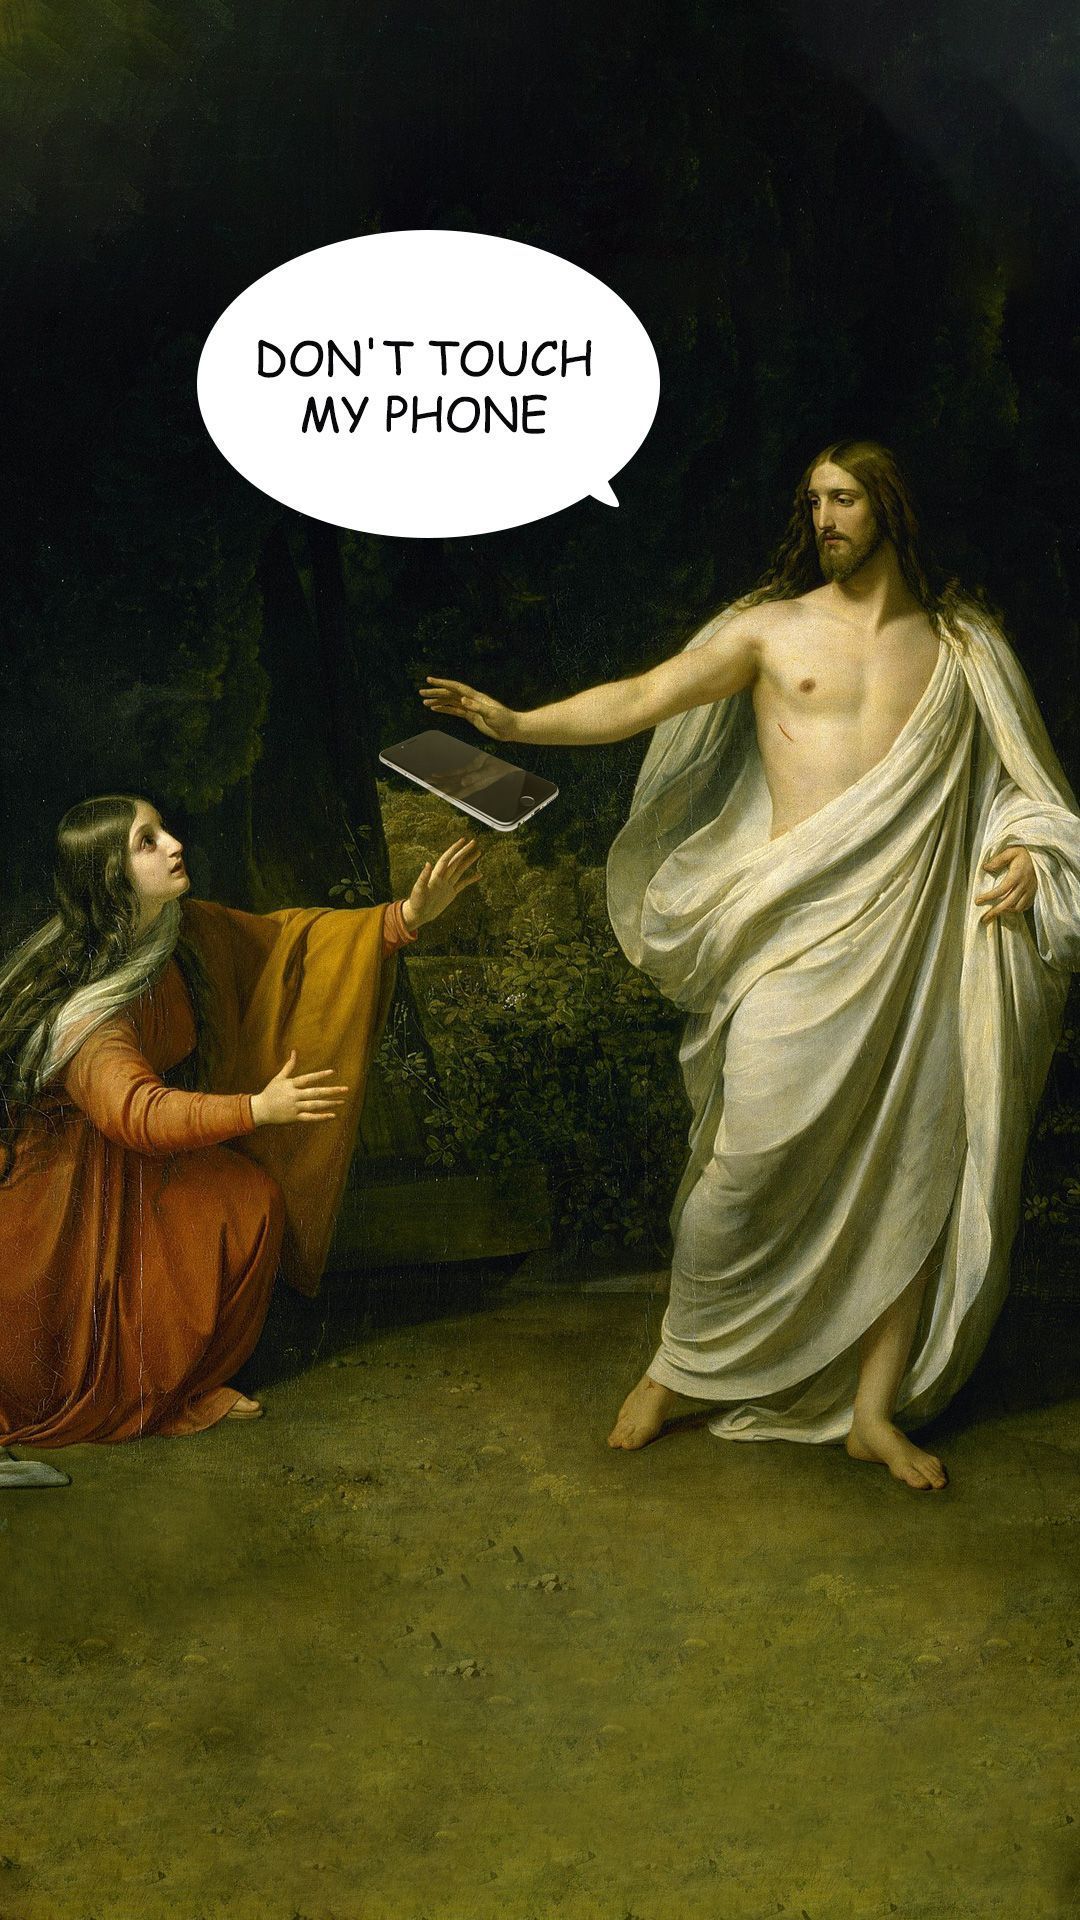 A painting of jesus giving something to someone - Don't touch my phone